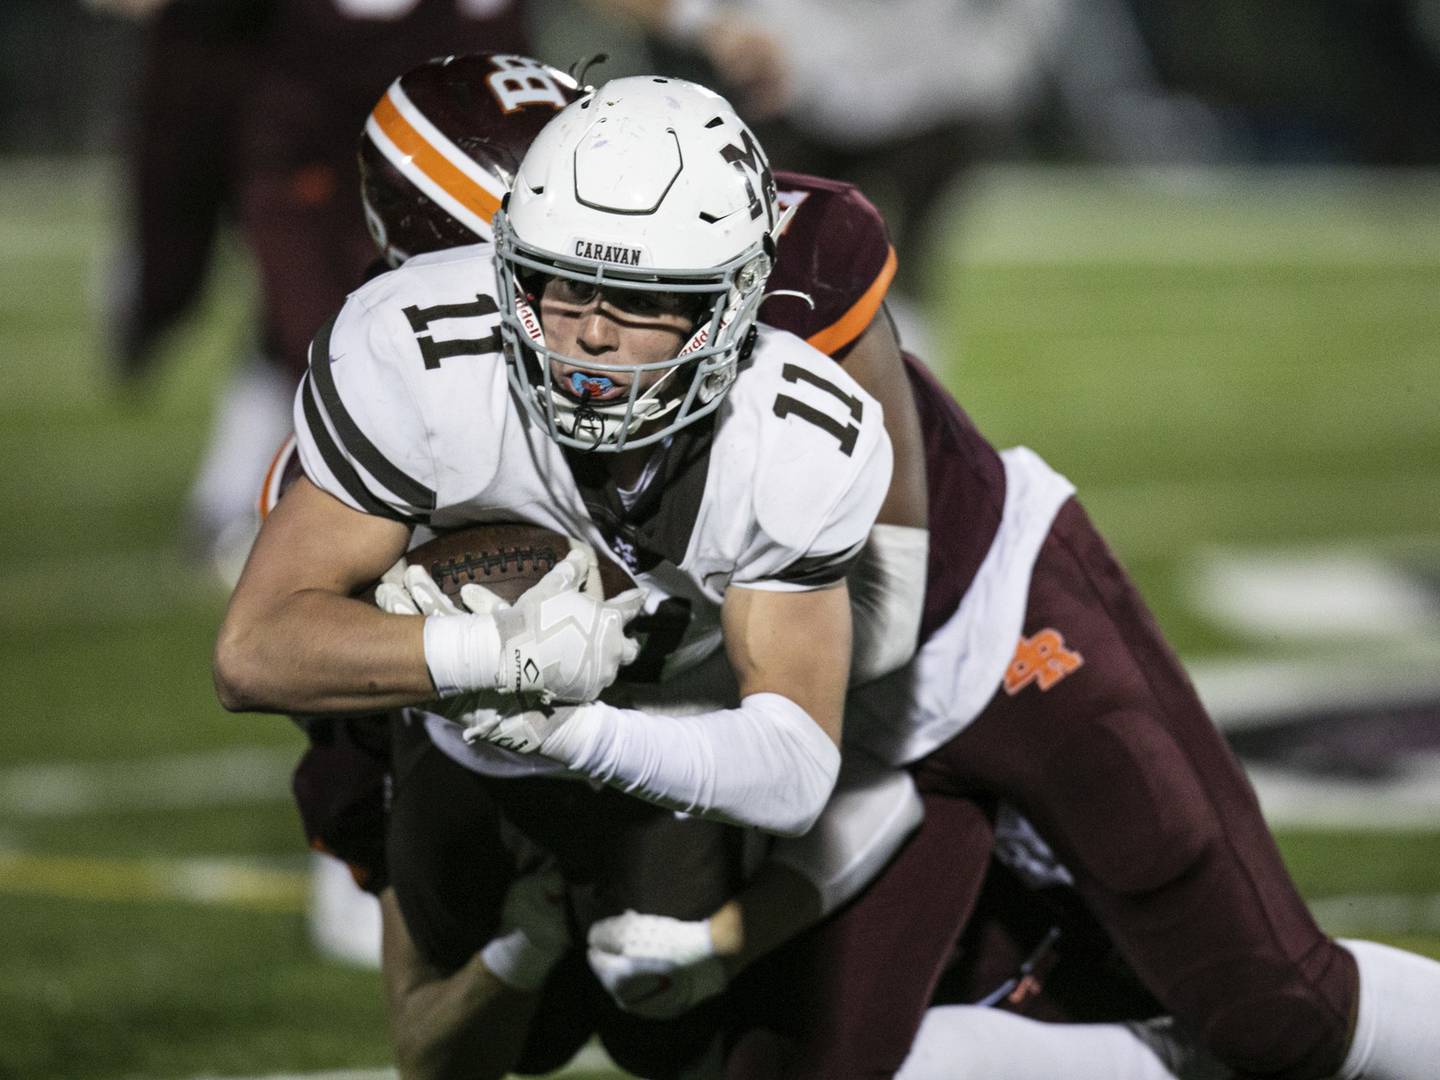 Mount Carmel's Denny Furlong (11) gets tackled after making a catch against Brother Rice during a CCL/ESCC Blue game in Chicago on Friday, Sept. 30, 2022.